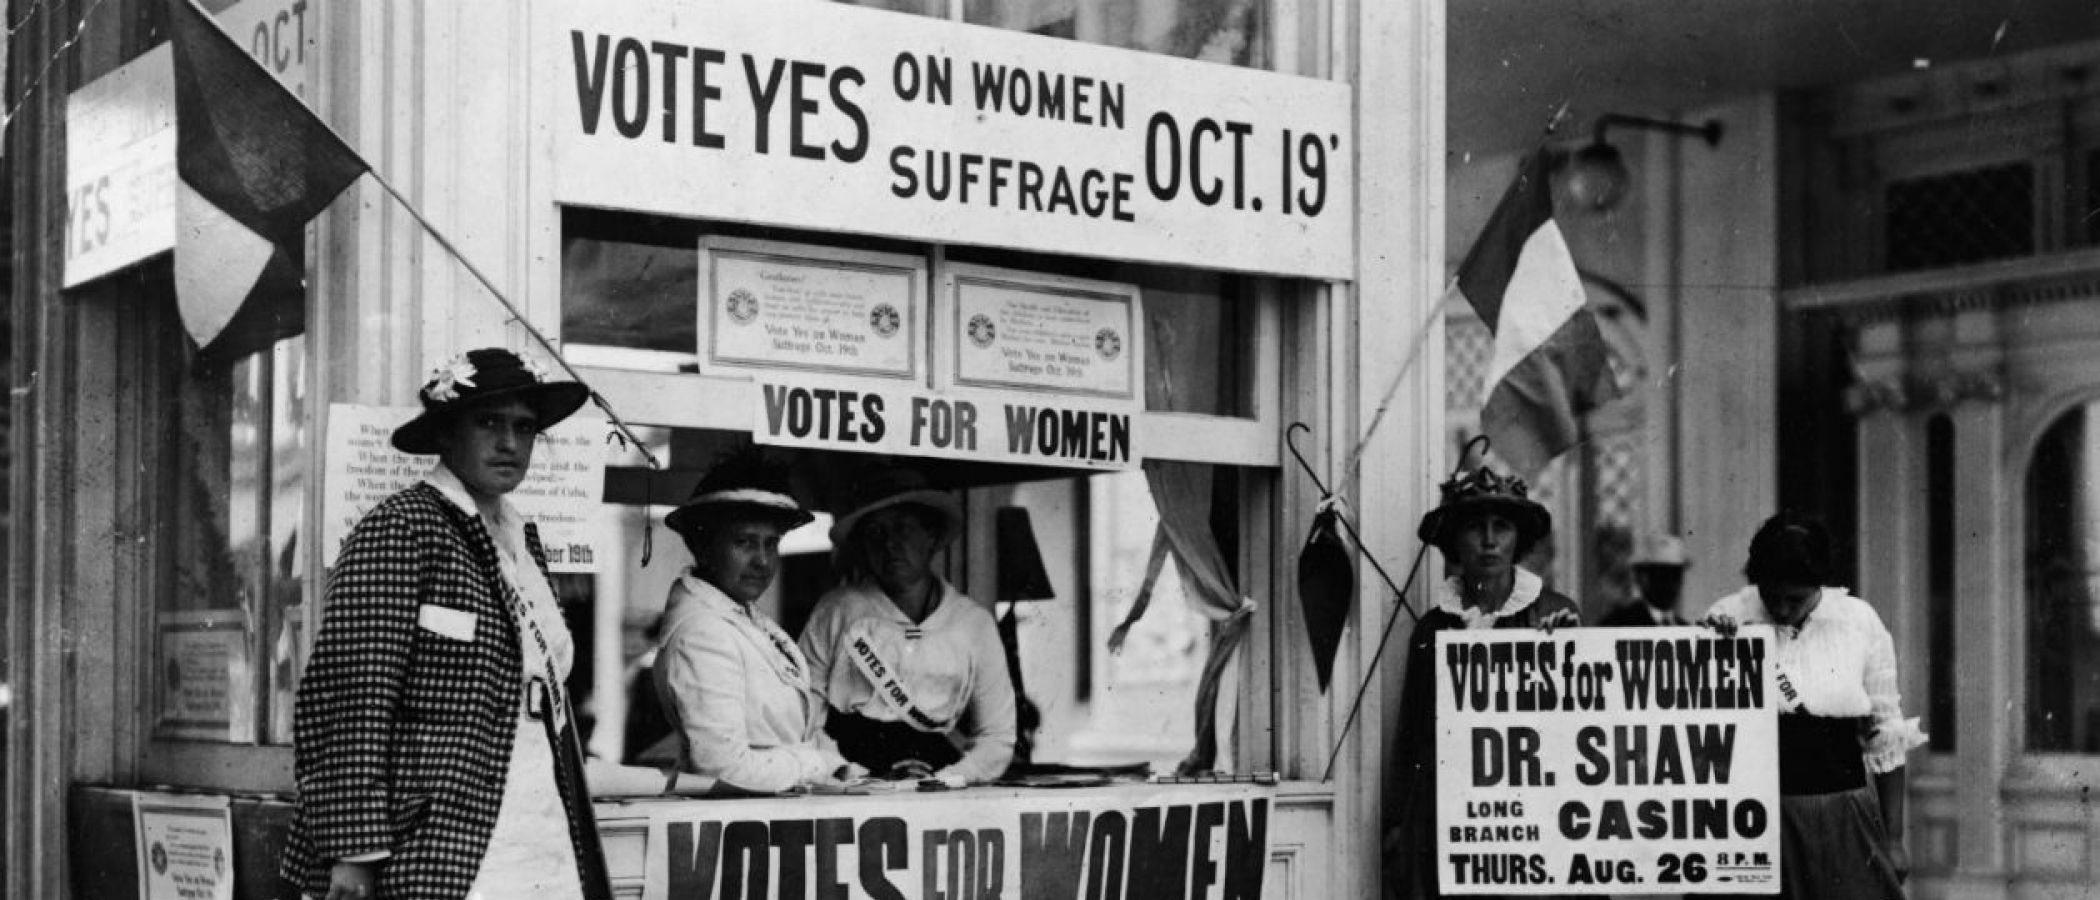 An image of women standing at a booth protesting for women suffrage